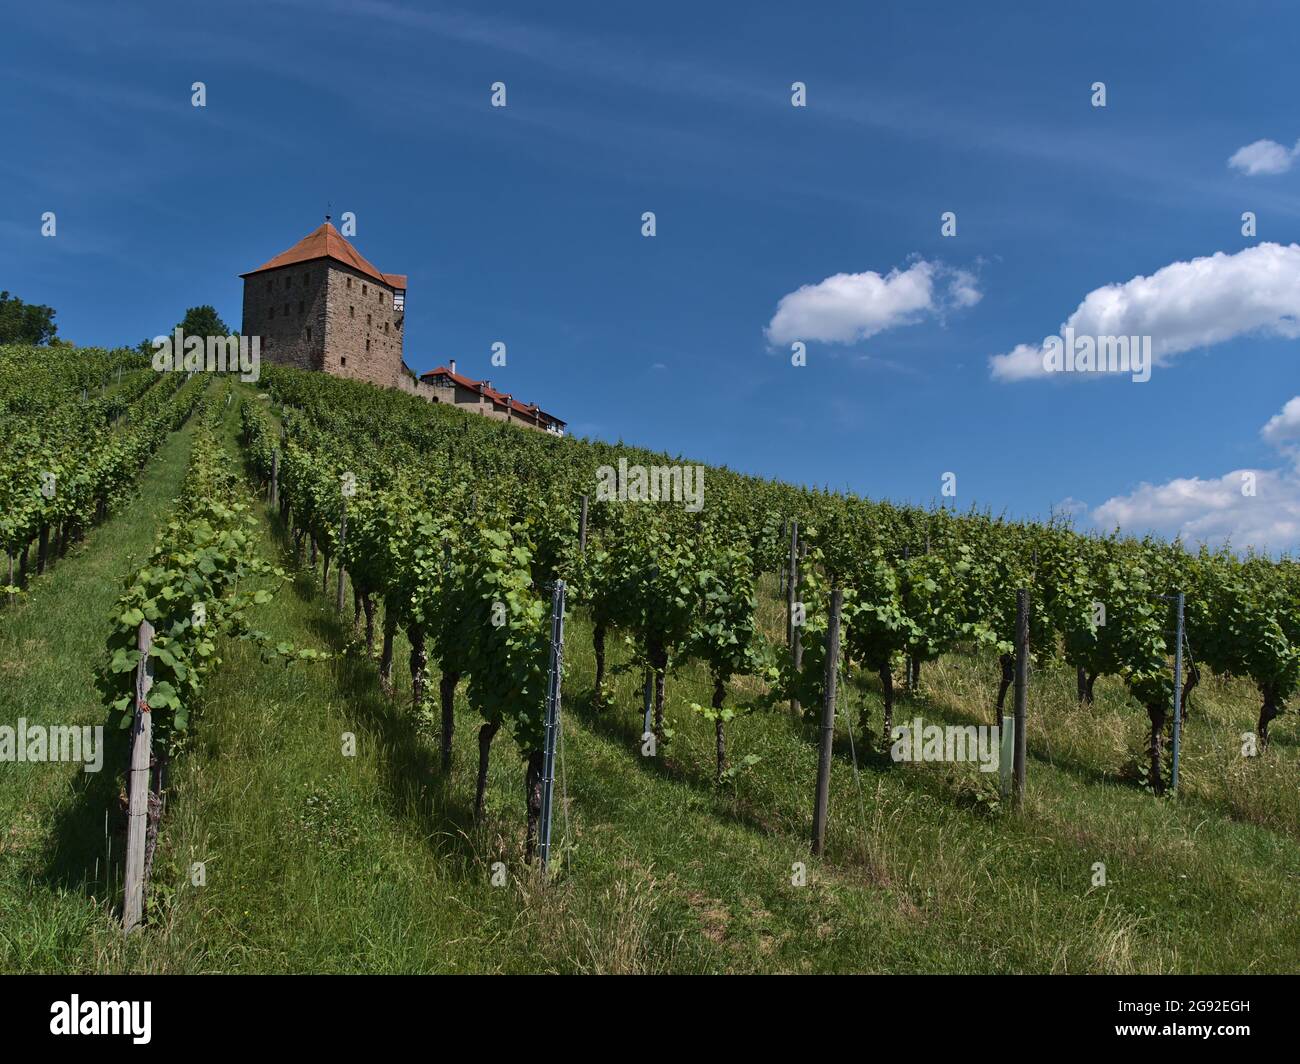 Low angle view of historic medieval castle Burg Wildeck in Baden-Württemberg, Germany, located on the top of vineyard hill with green leaves. Stock Photo